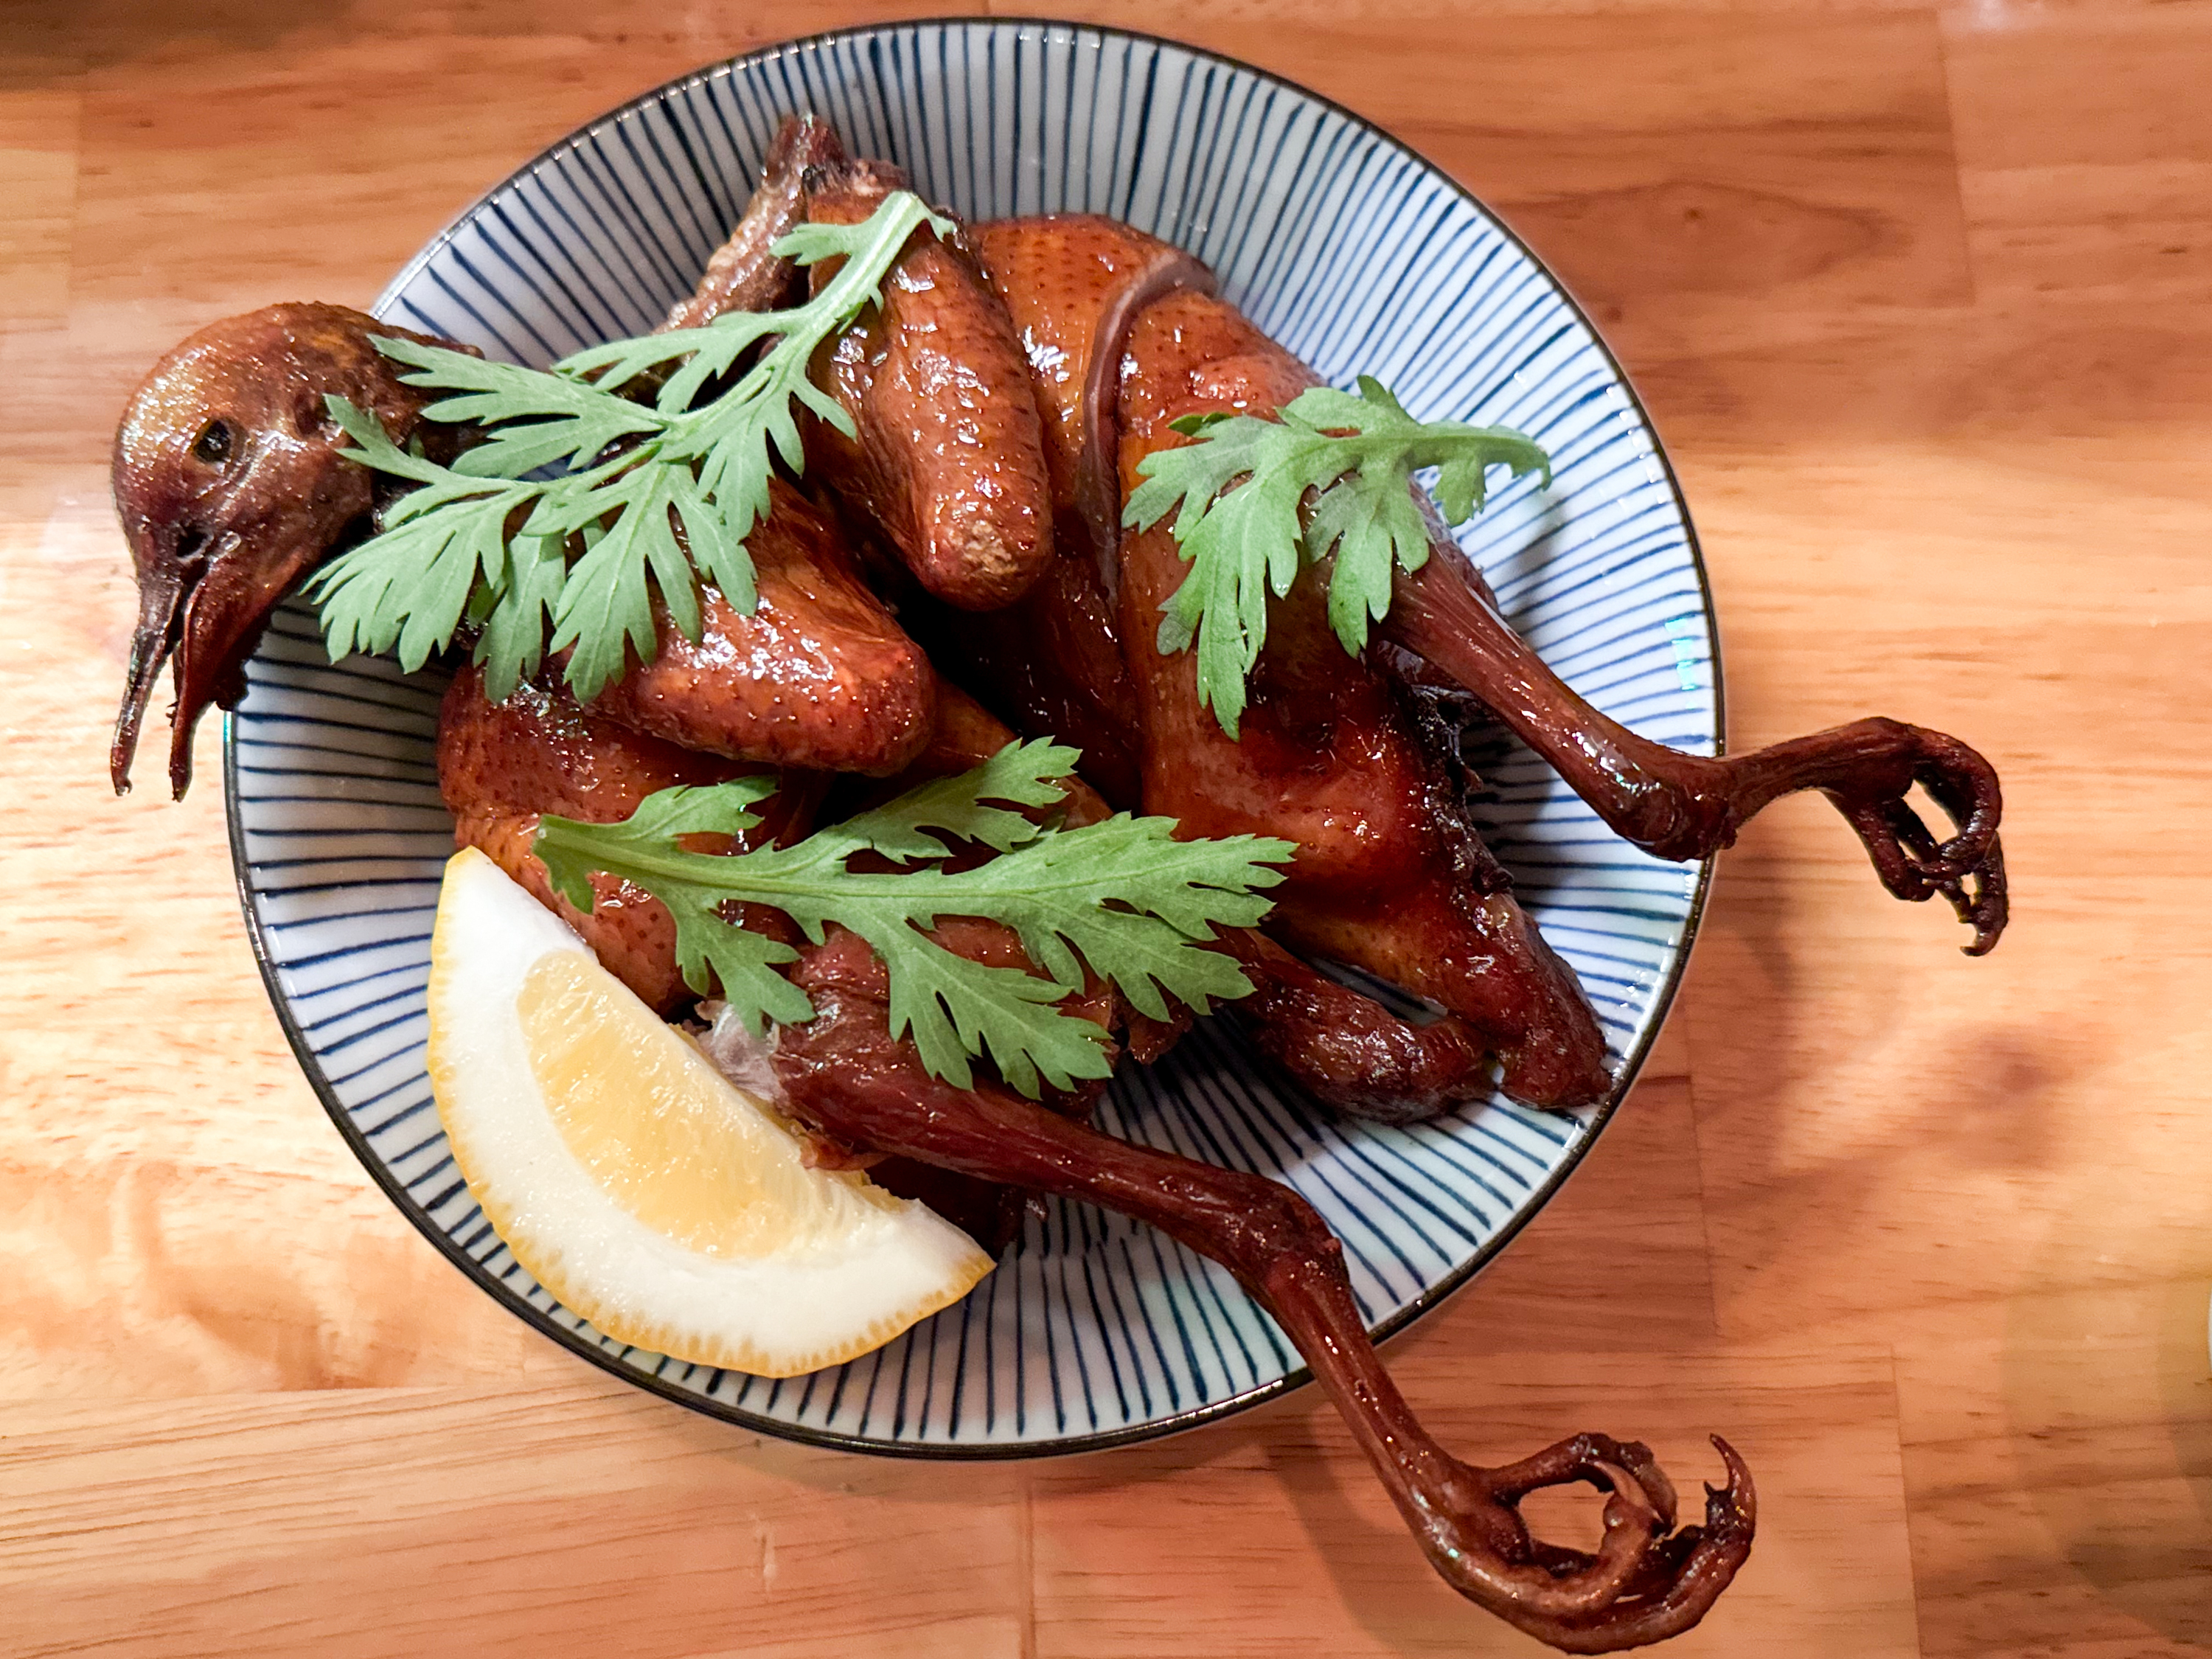 The deep-fried squab at Four Kings is marinated for 10 days, then lightly hickory smoked and deep-fried before serving. The squab is served whole and comes garnished with chrysanthemum greens